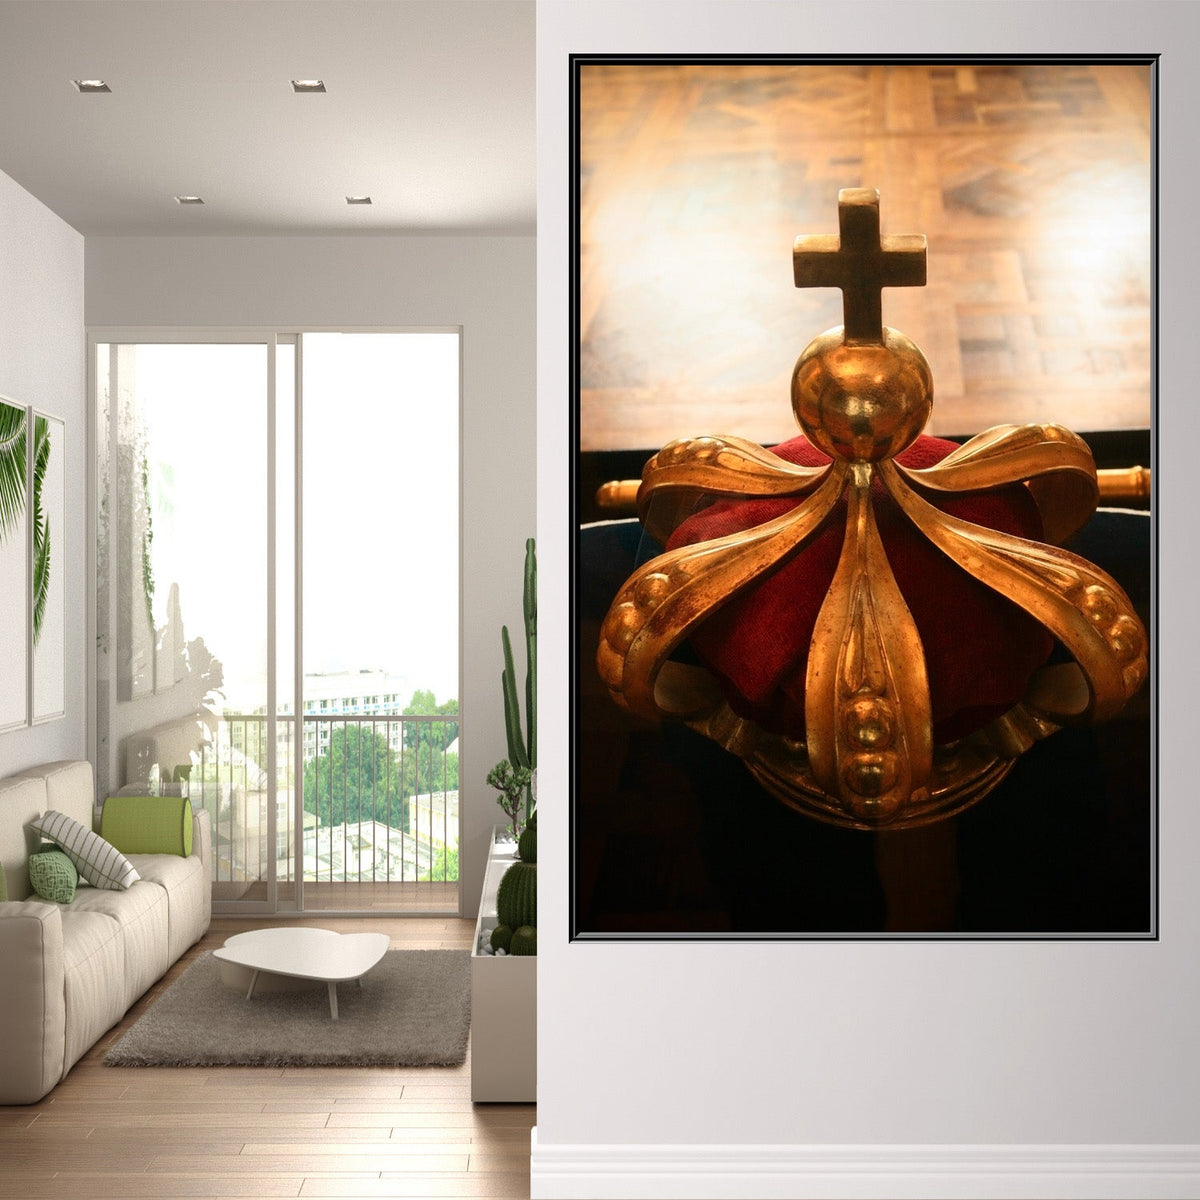 https://cdn.shopify.com/s/files/1/0387/9986/8044/products/TheCrucifixandCrownCanvasArtprintFloatingFrame-2.jpg